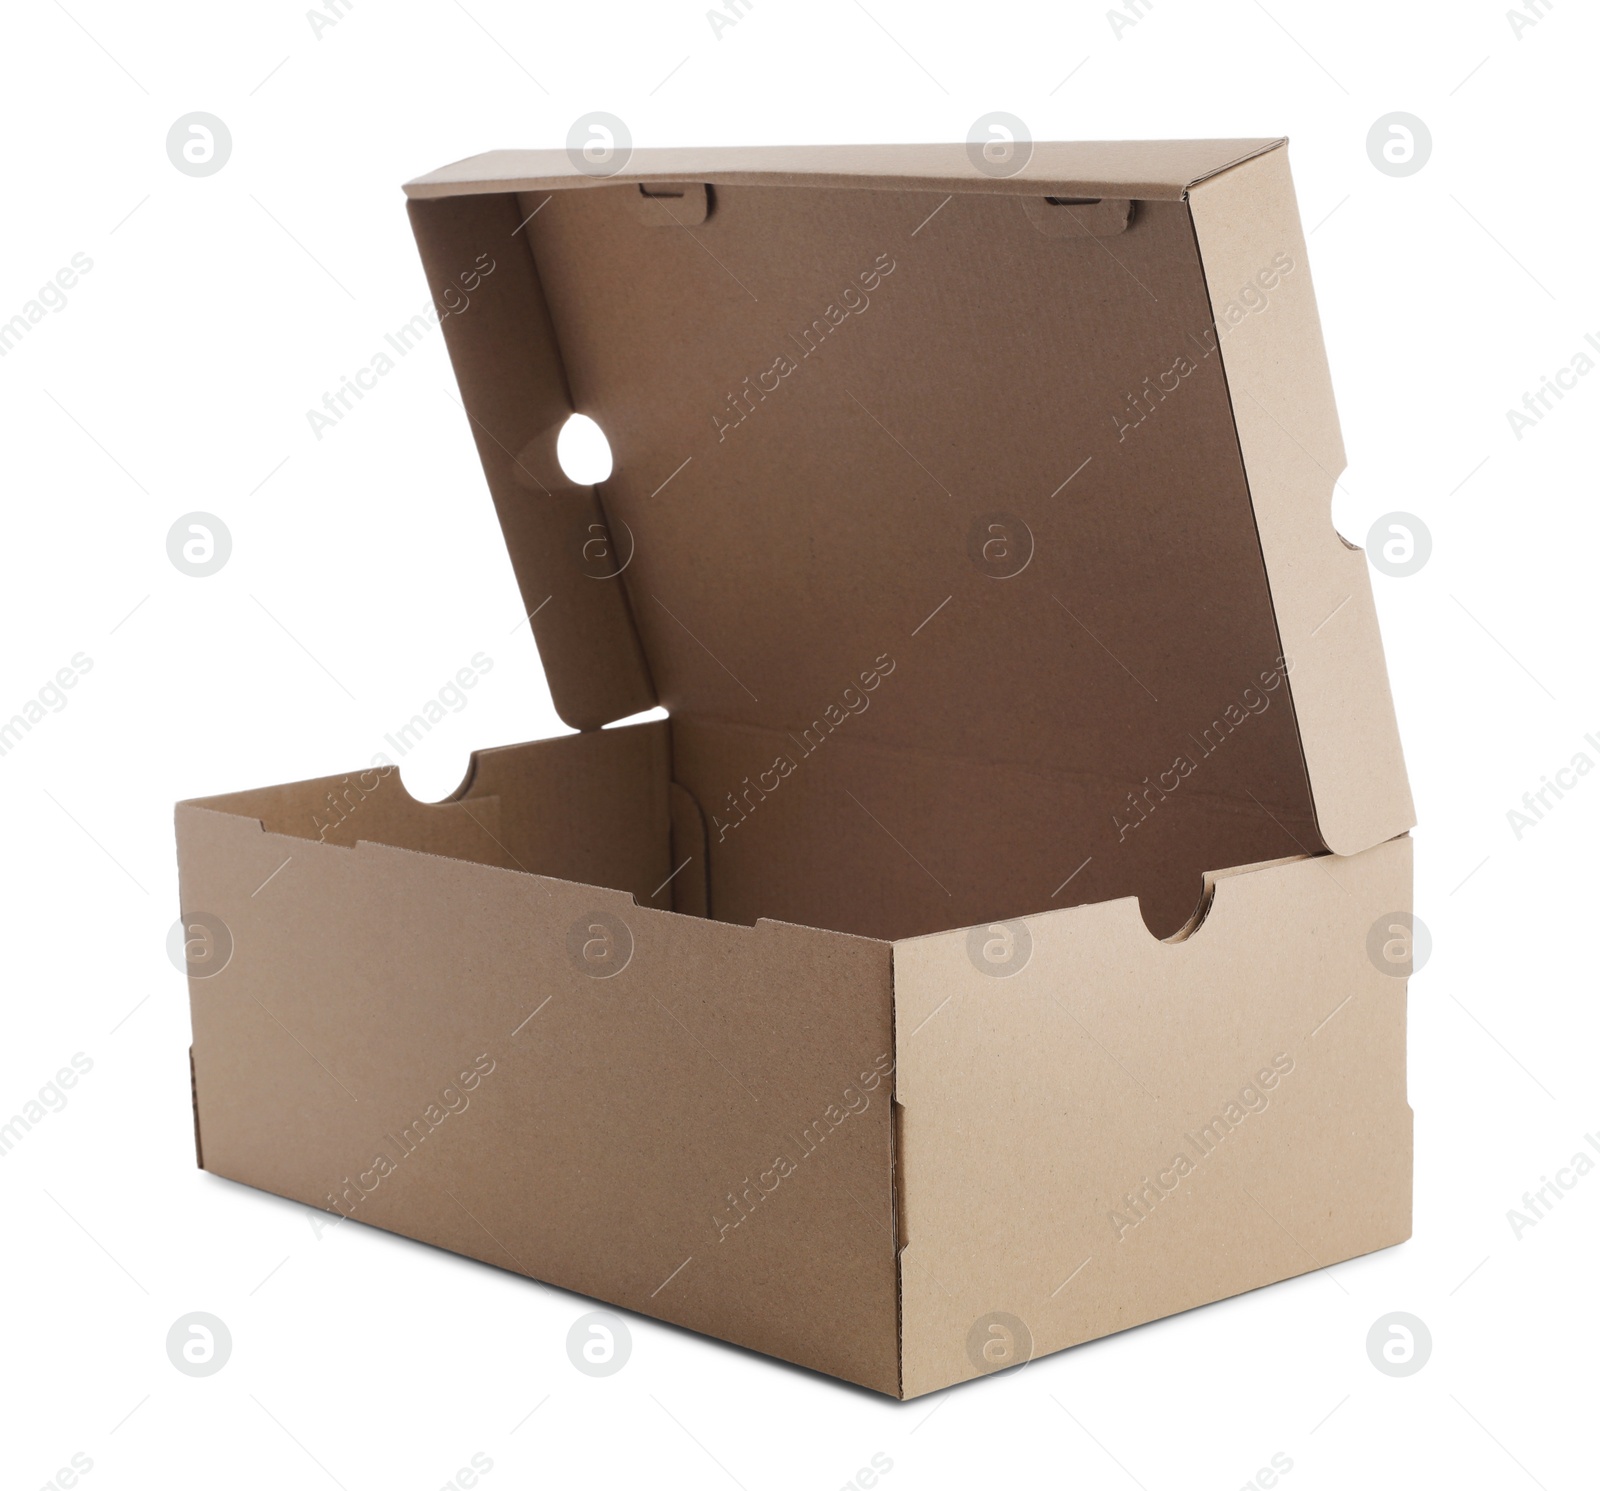 Photo of Open cardboard box for shoes isolated on white